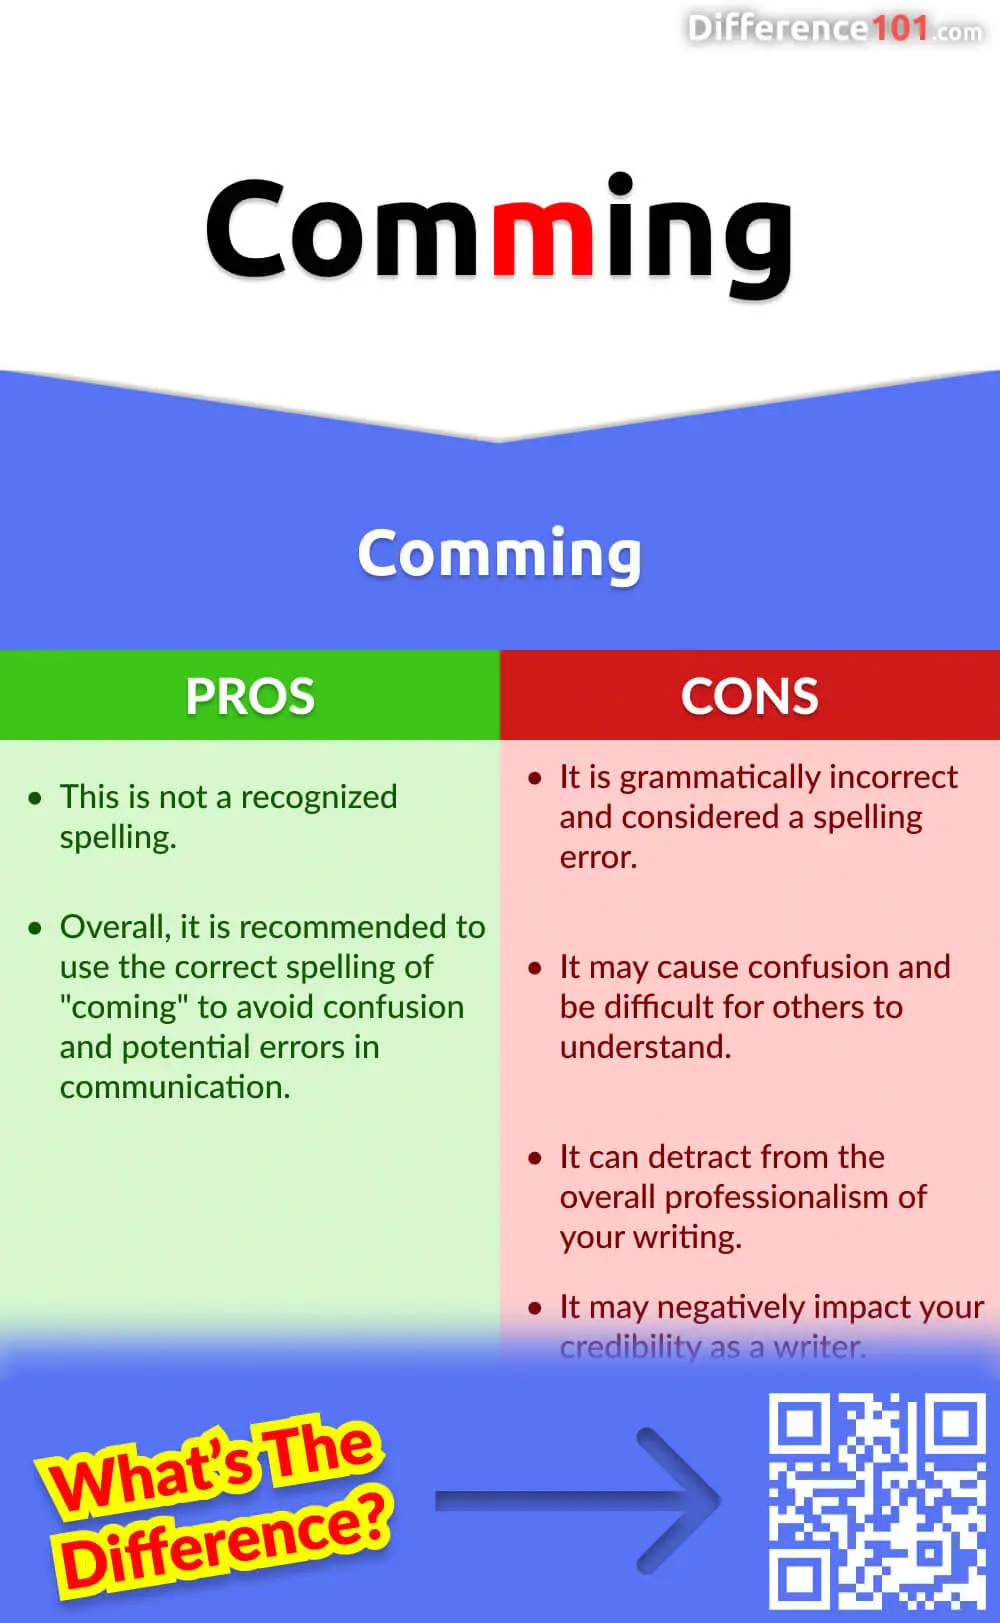 Comming Pros & Cons
